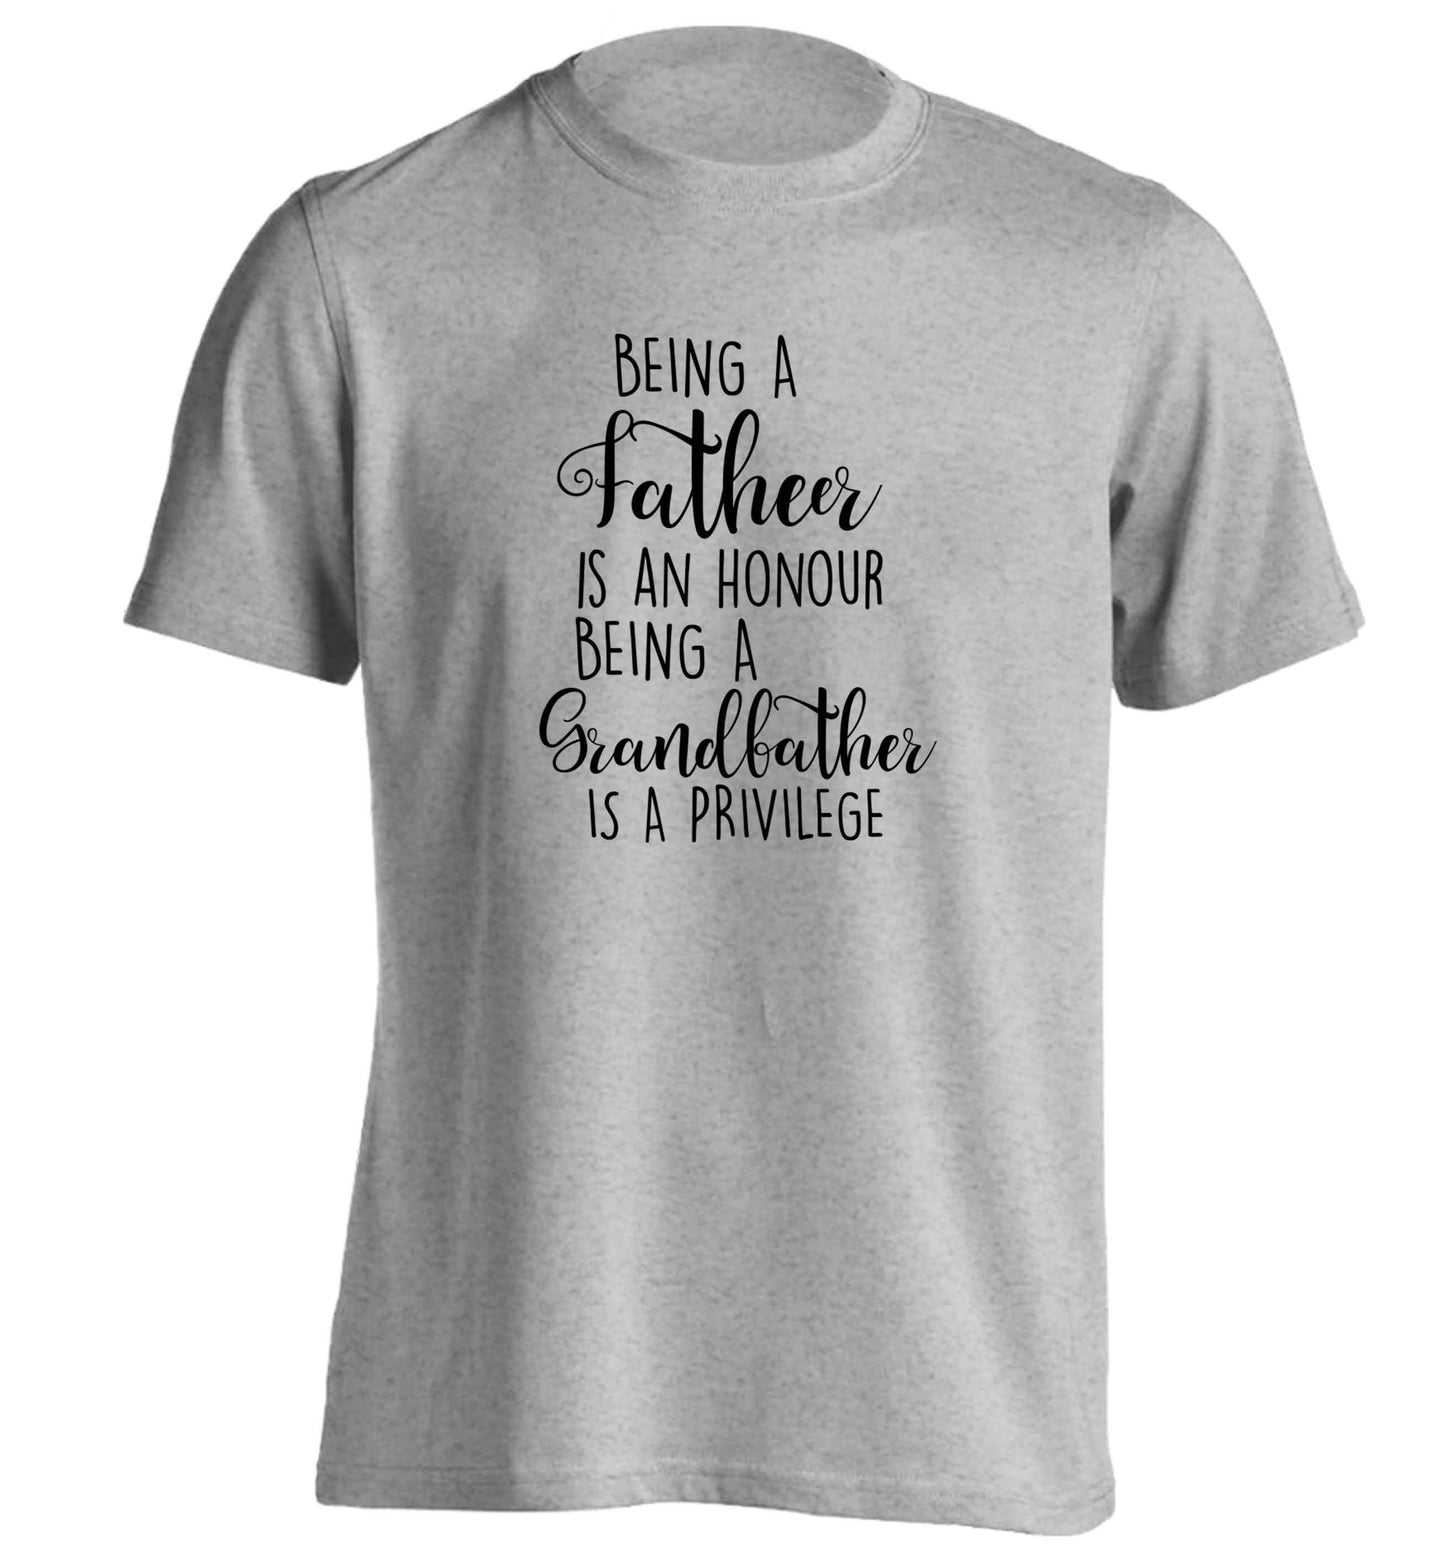 Being a father is an honour being a grandfather is a privilege adults unisex grey Tshirt 2XL